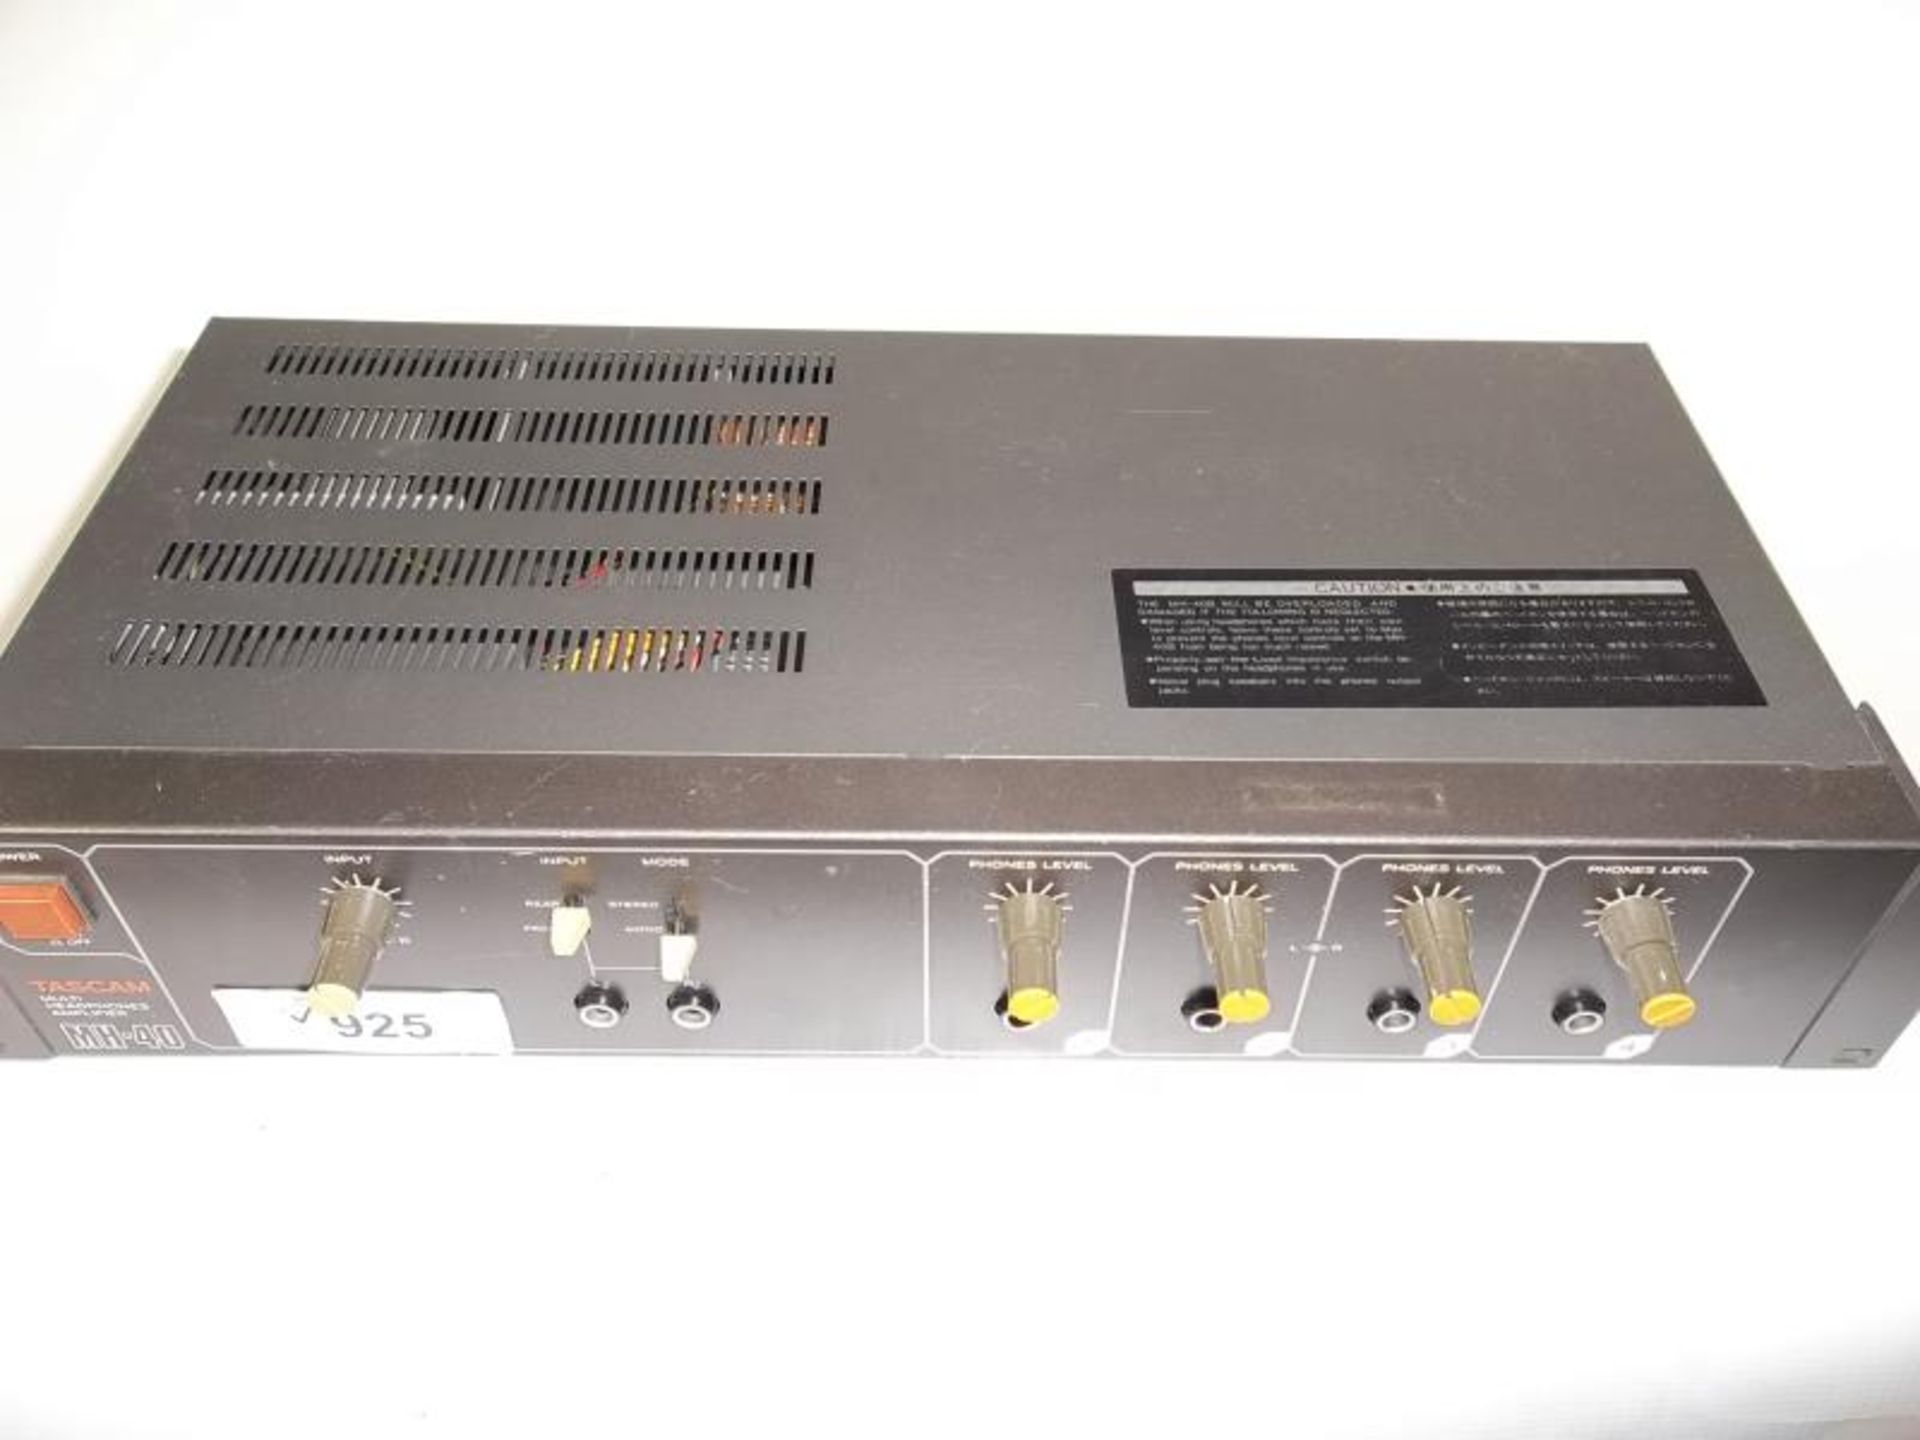 Tascam MH-40 Multi Headphone Amp, s# 280129, rack mountable, tested - powers up - Image 3 of 4